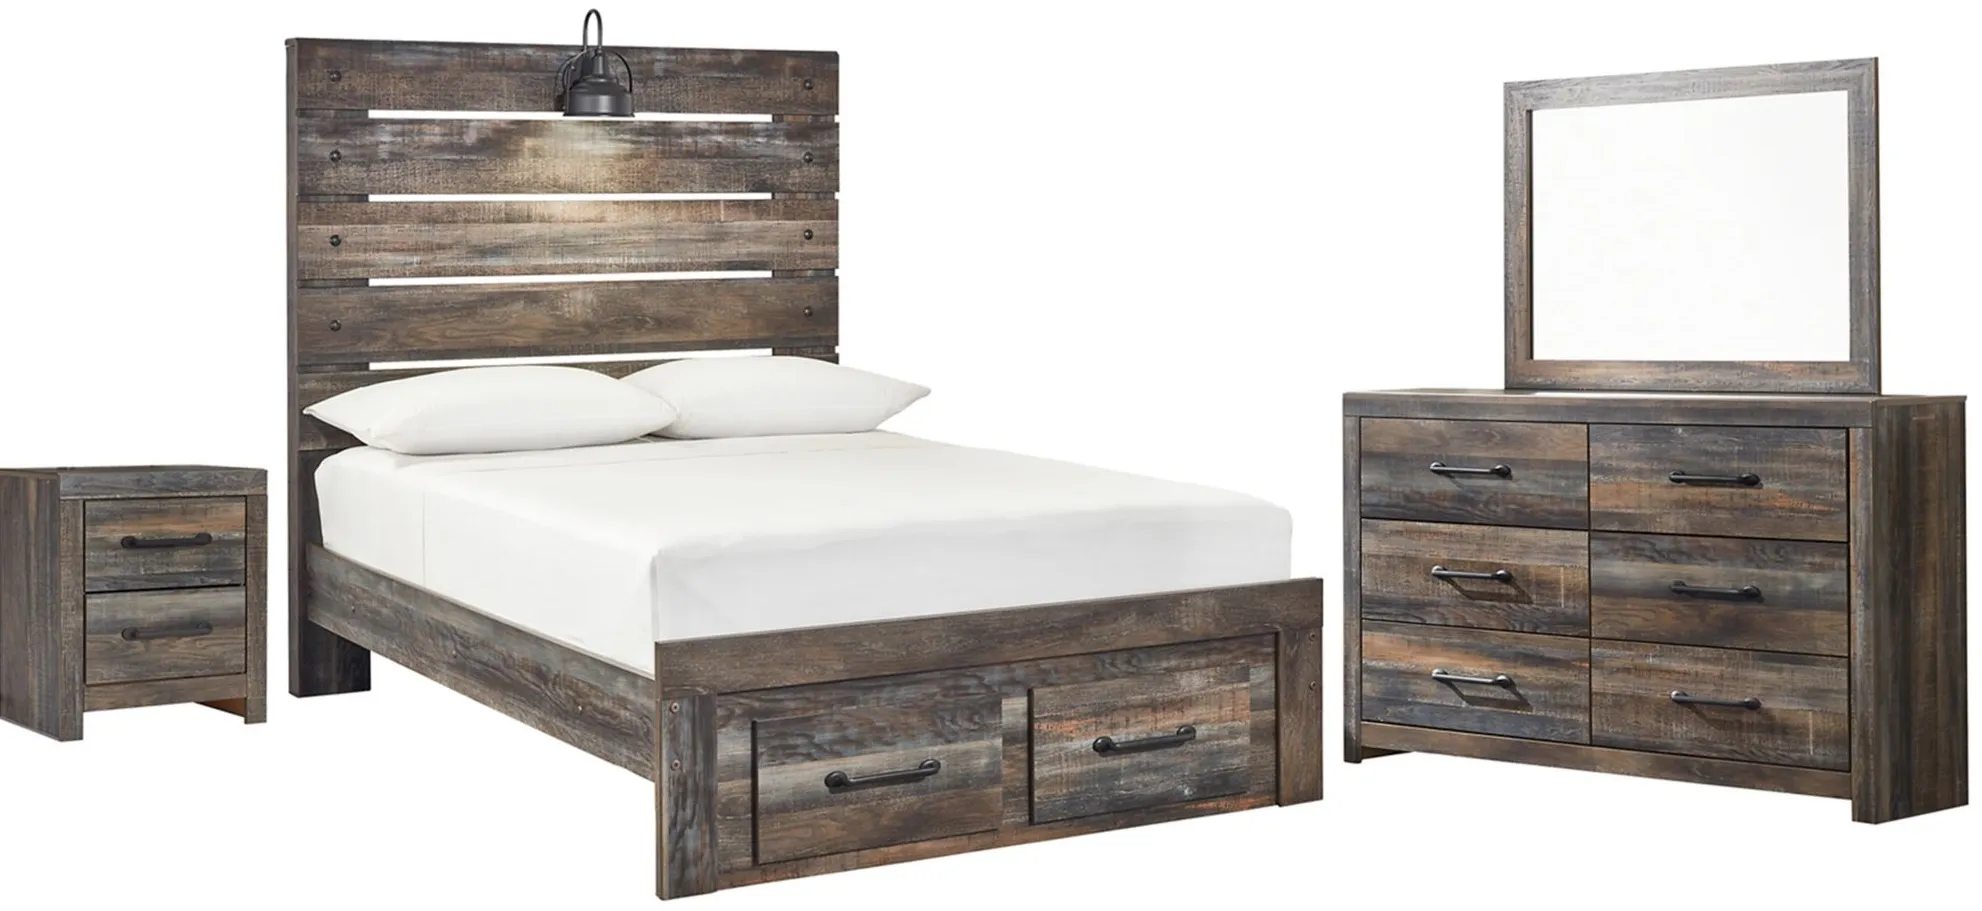 Luna 4-Pc. Panel Bedroom Set w/Storage in Rustic Brown by Ashley Furniture